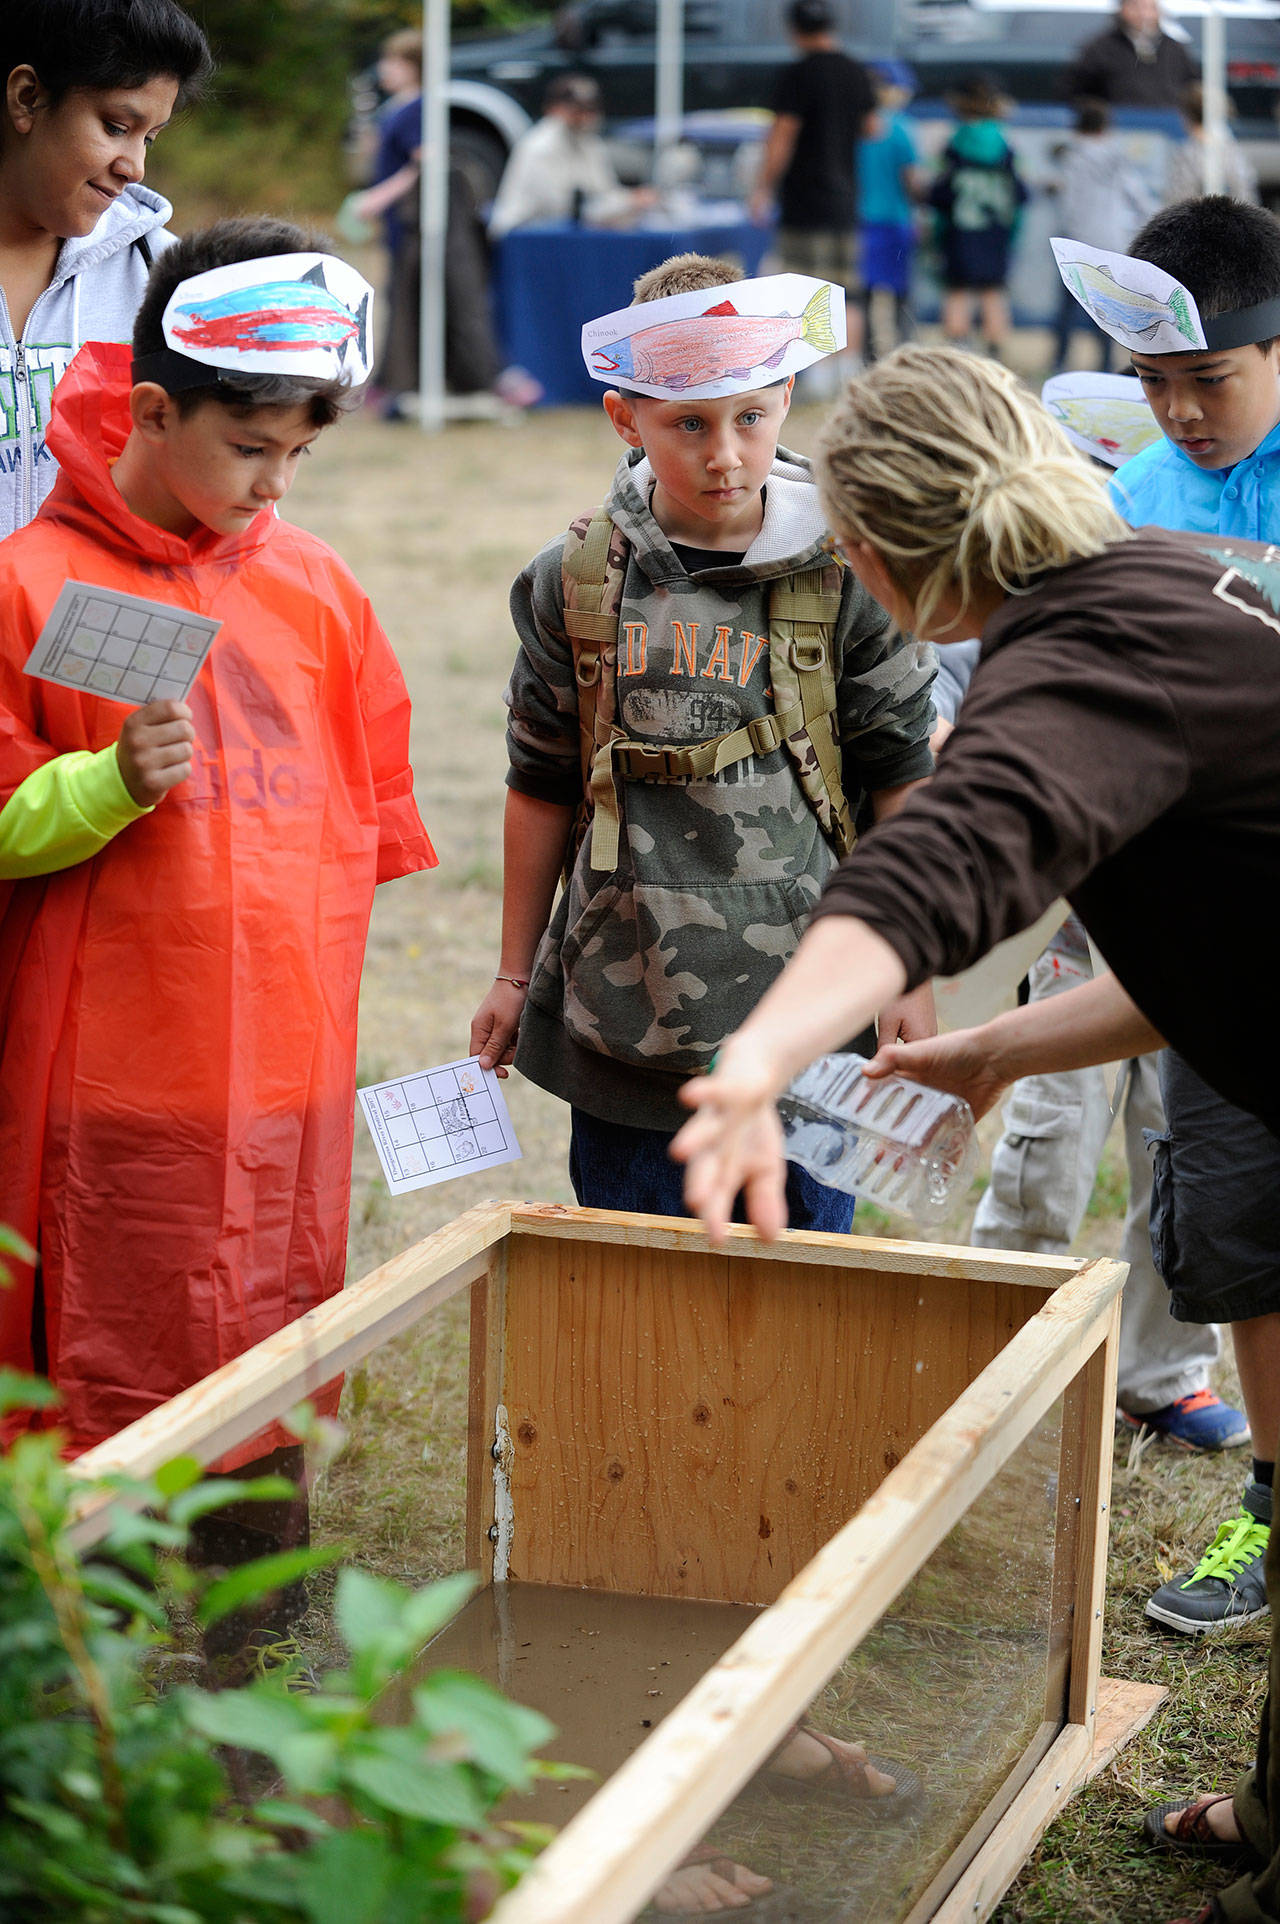 Greywolf Elementary students, from left, Adan McCaughan, Coletyn Hull, and Andonios Iott in Shannon Green’s third grade class listen in on one of the many booths at the Dungeness River Festival last year.                                 Sequim Gazette file photo by Michael Dashiell